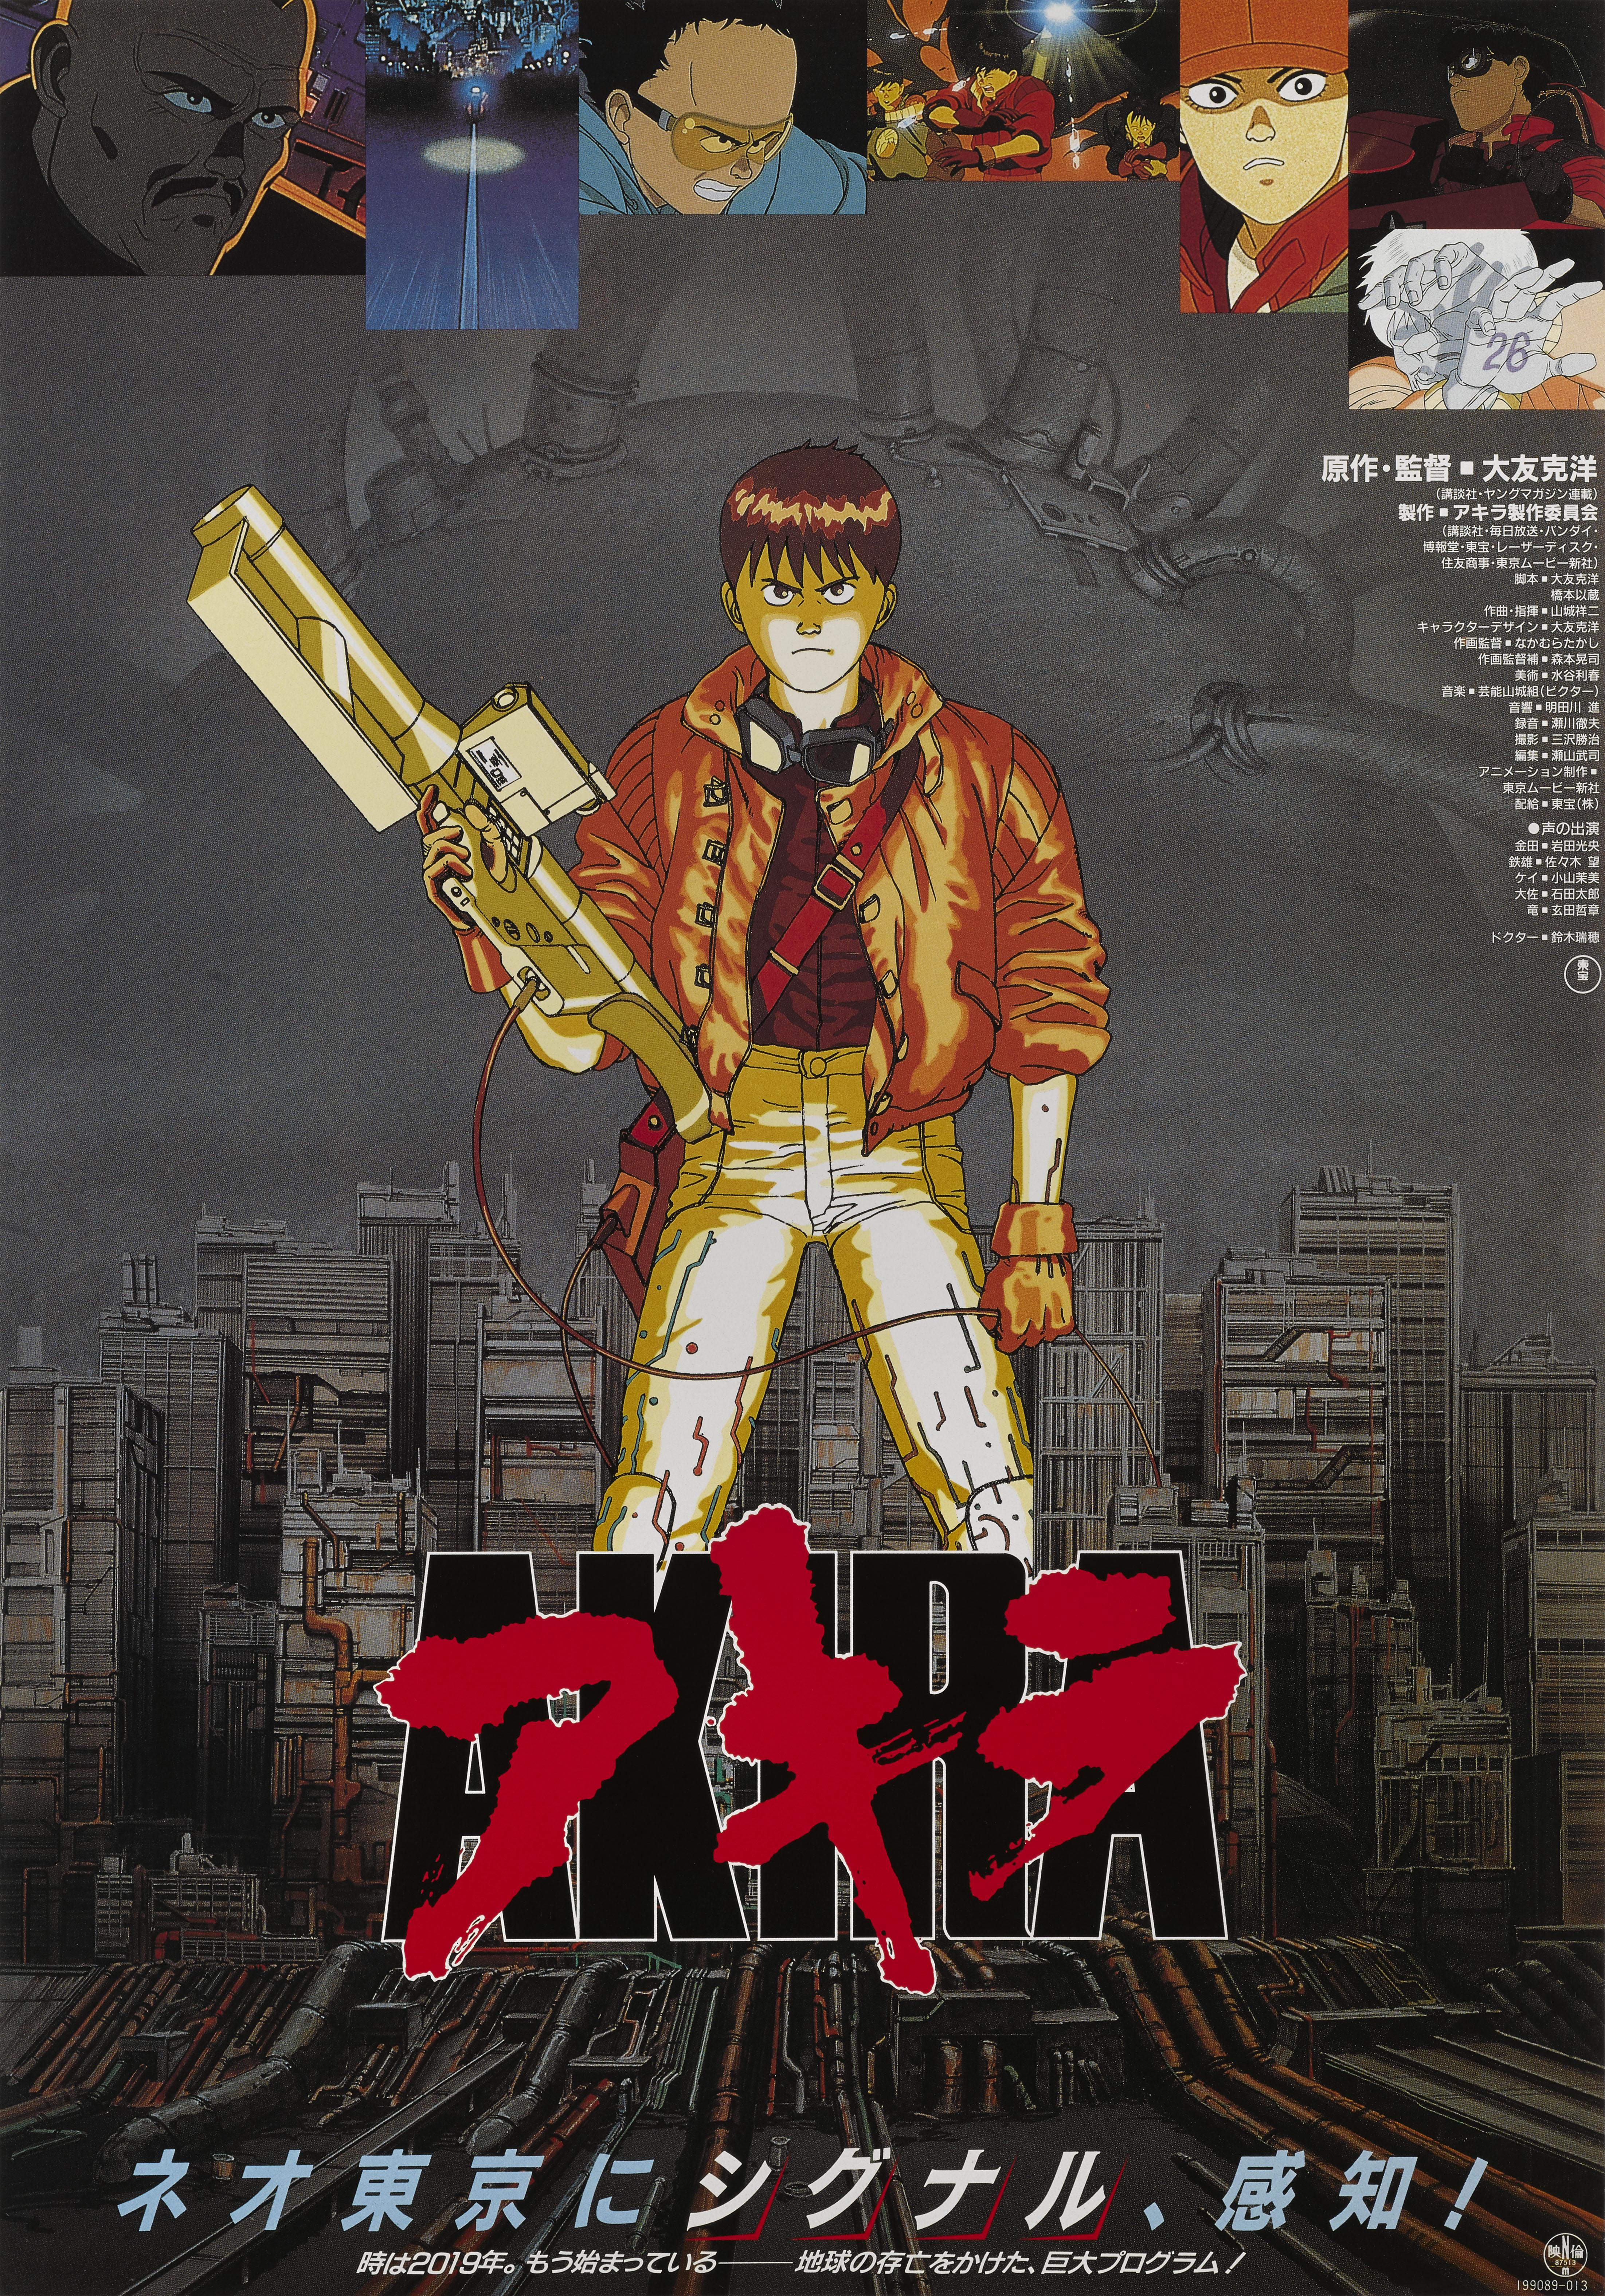 Original Japanese film poster for the 1988 science fiction animation film Akira.
The film directed by Katsuhiro Otomo.
This poster is unfolded and conservation linen backed in near mint condition.
It would be shipped rolled in a strong tube.
 